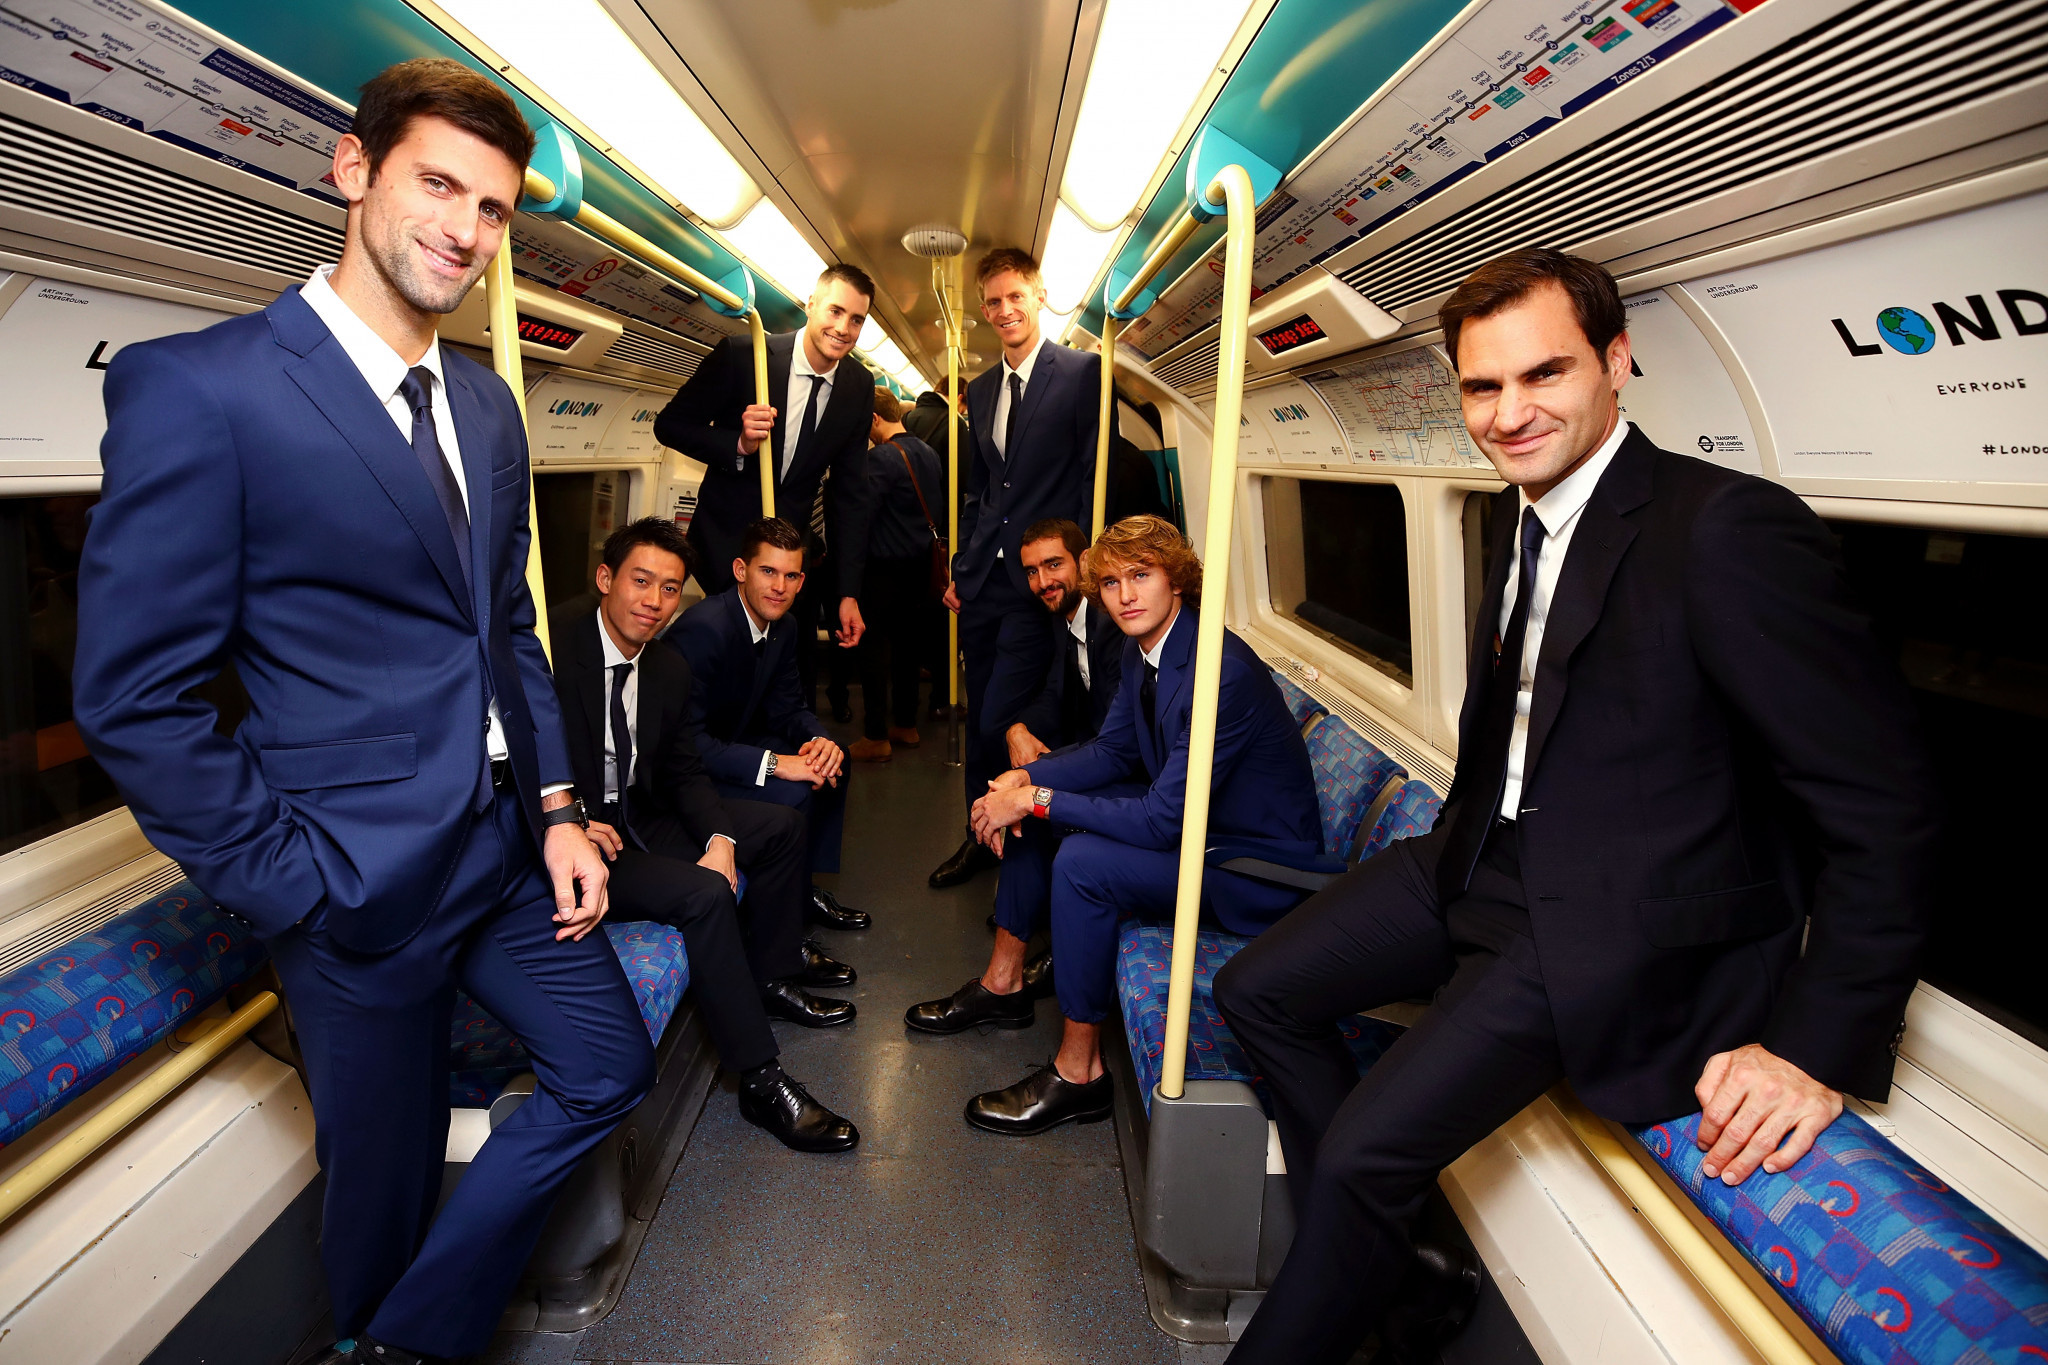 The players pose on the London Underground before the tournament begins tomorrow  ©Getty Images